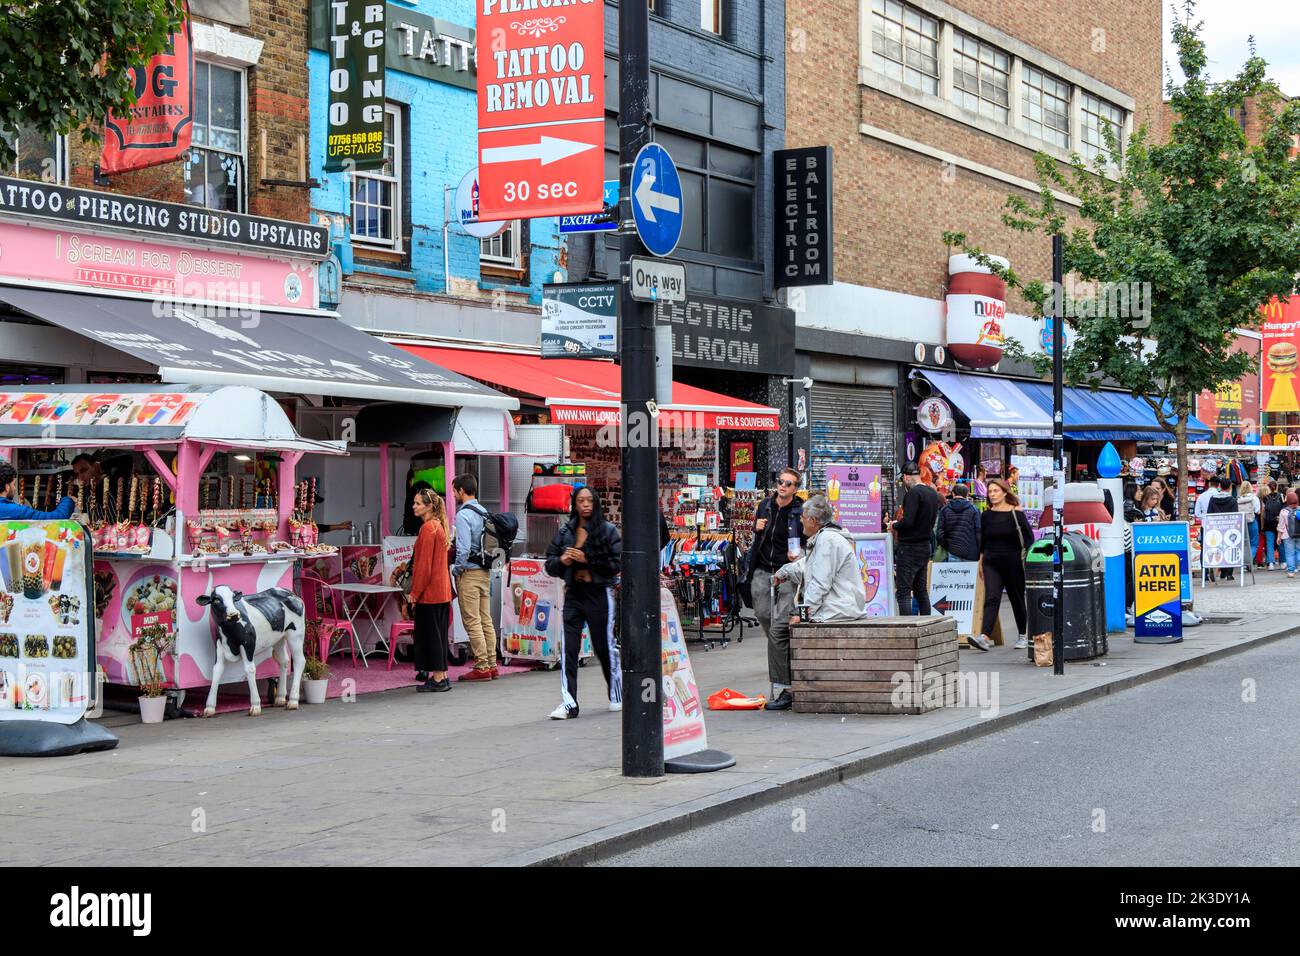 Shops and stalls in Camden High Street, London, UK Stock Photo